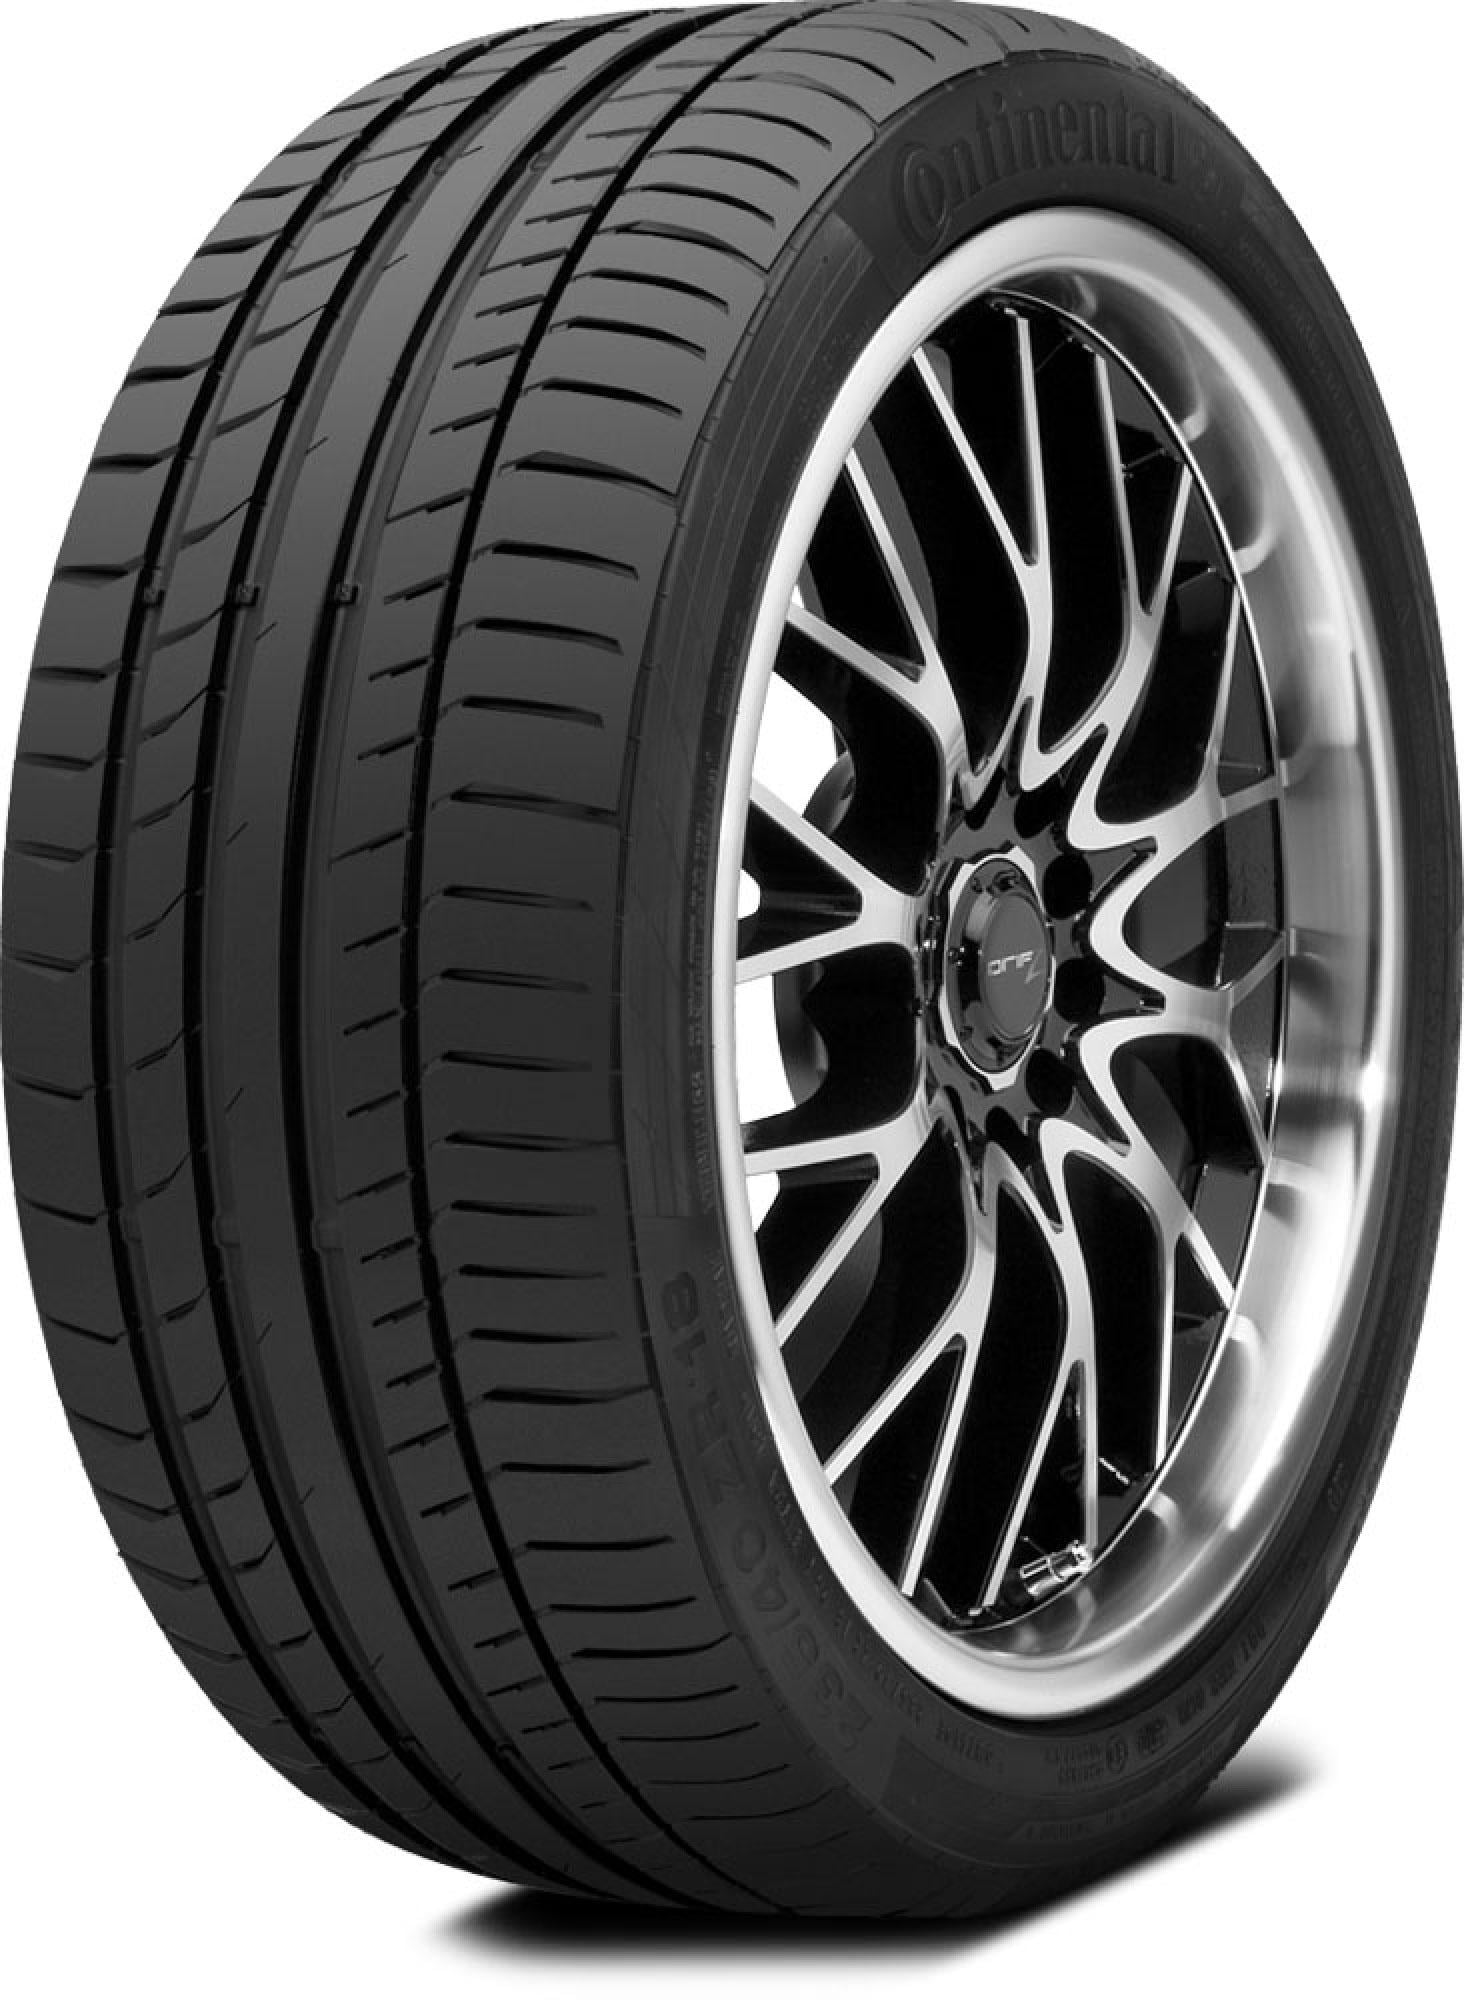 Continental ContiSportContact 5 Summer 225/45R18 91Y Passenger Tire